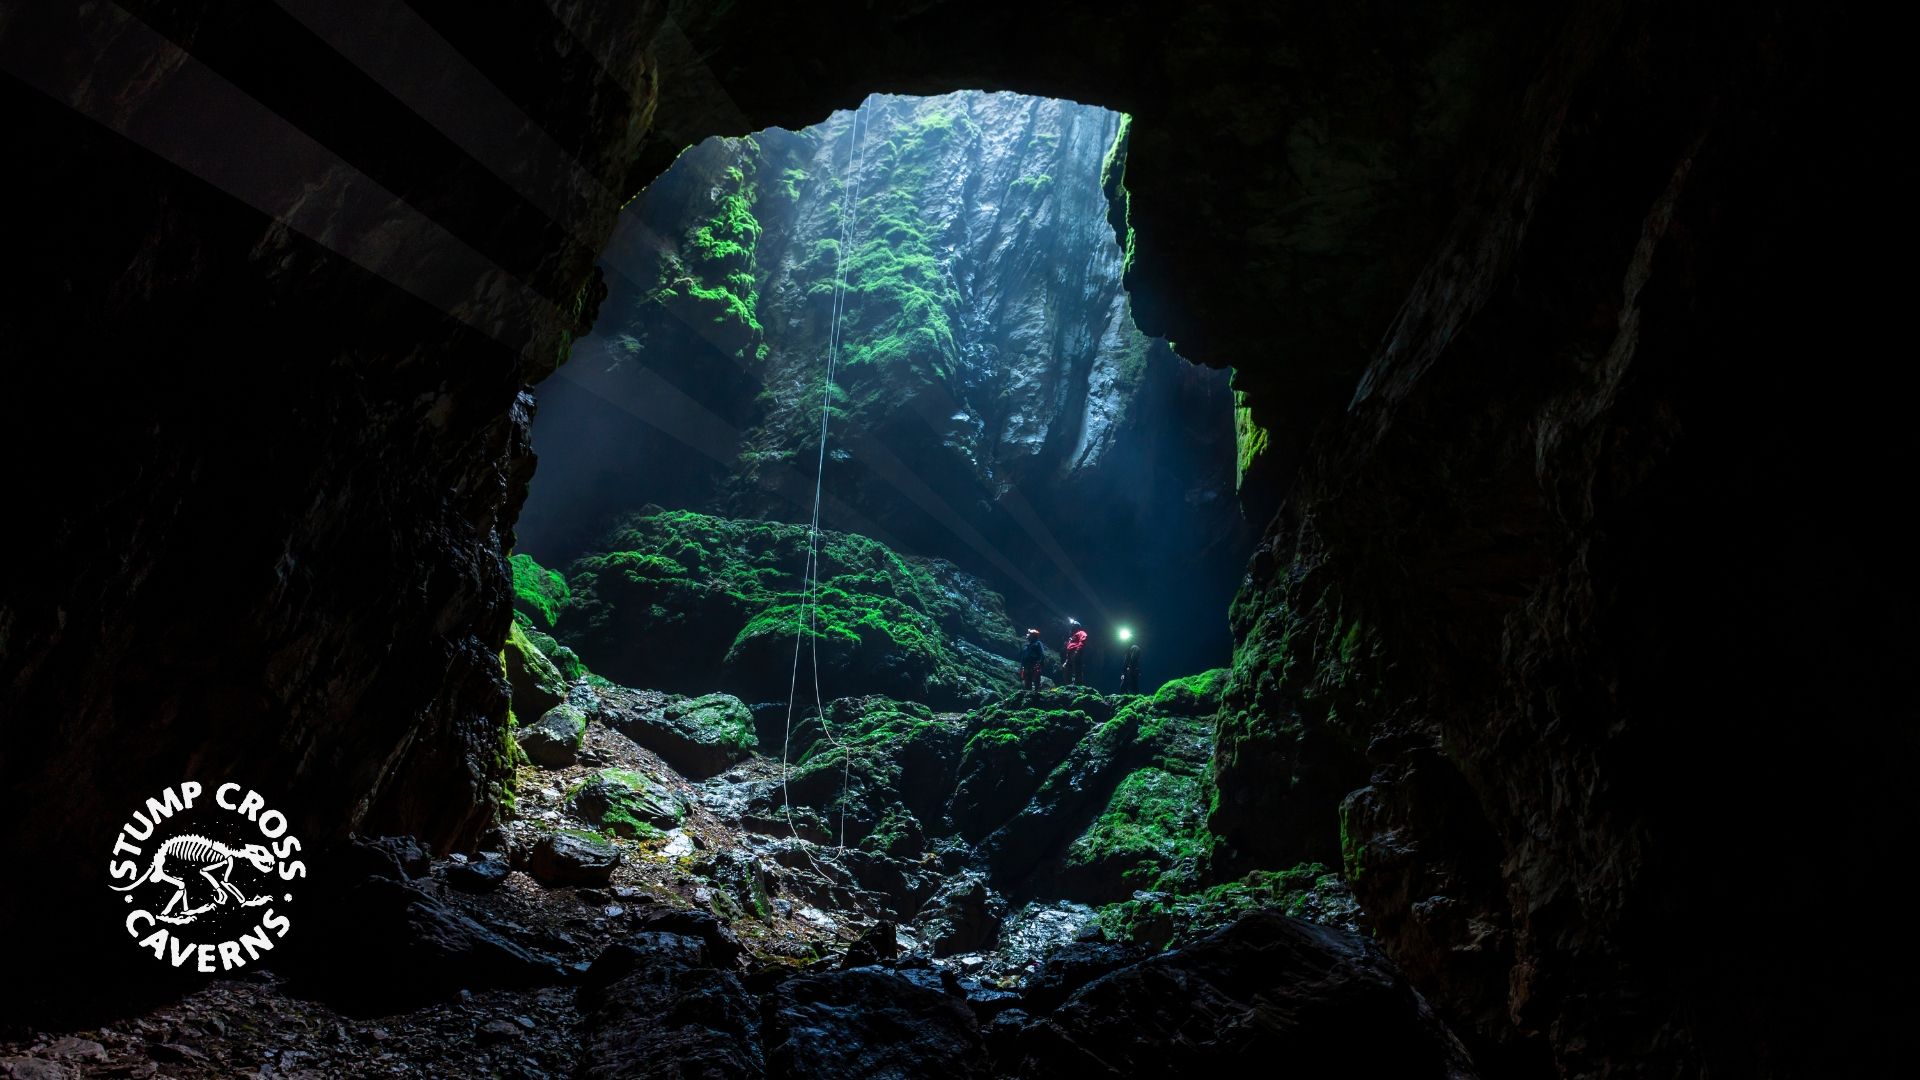 Scientists can use caves to learn about the history of Earth's climate. But how? Find out 